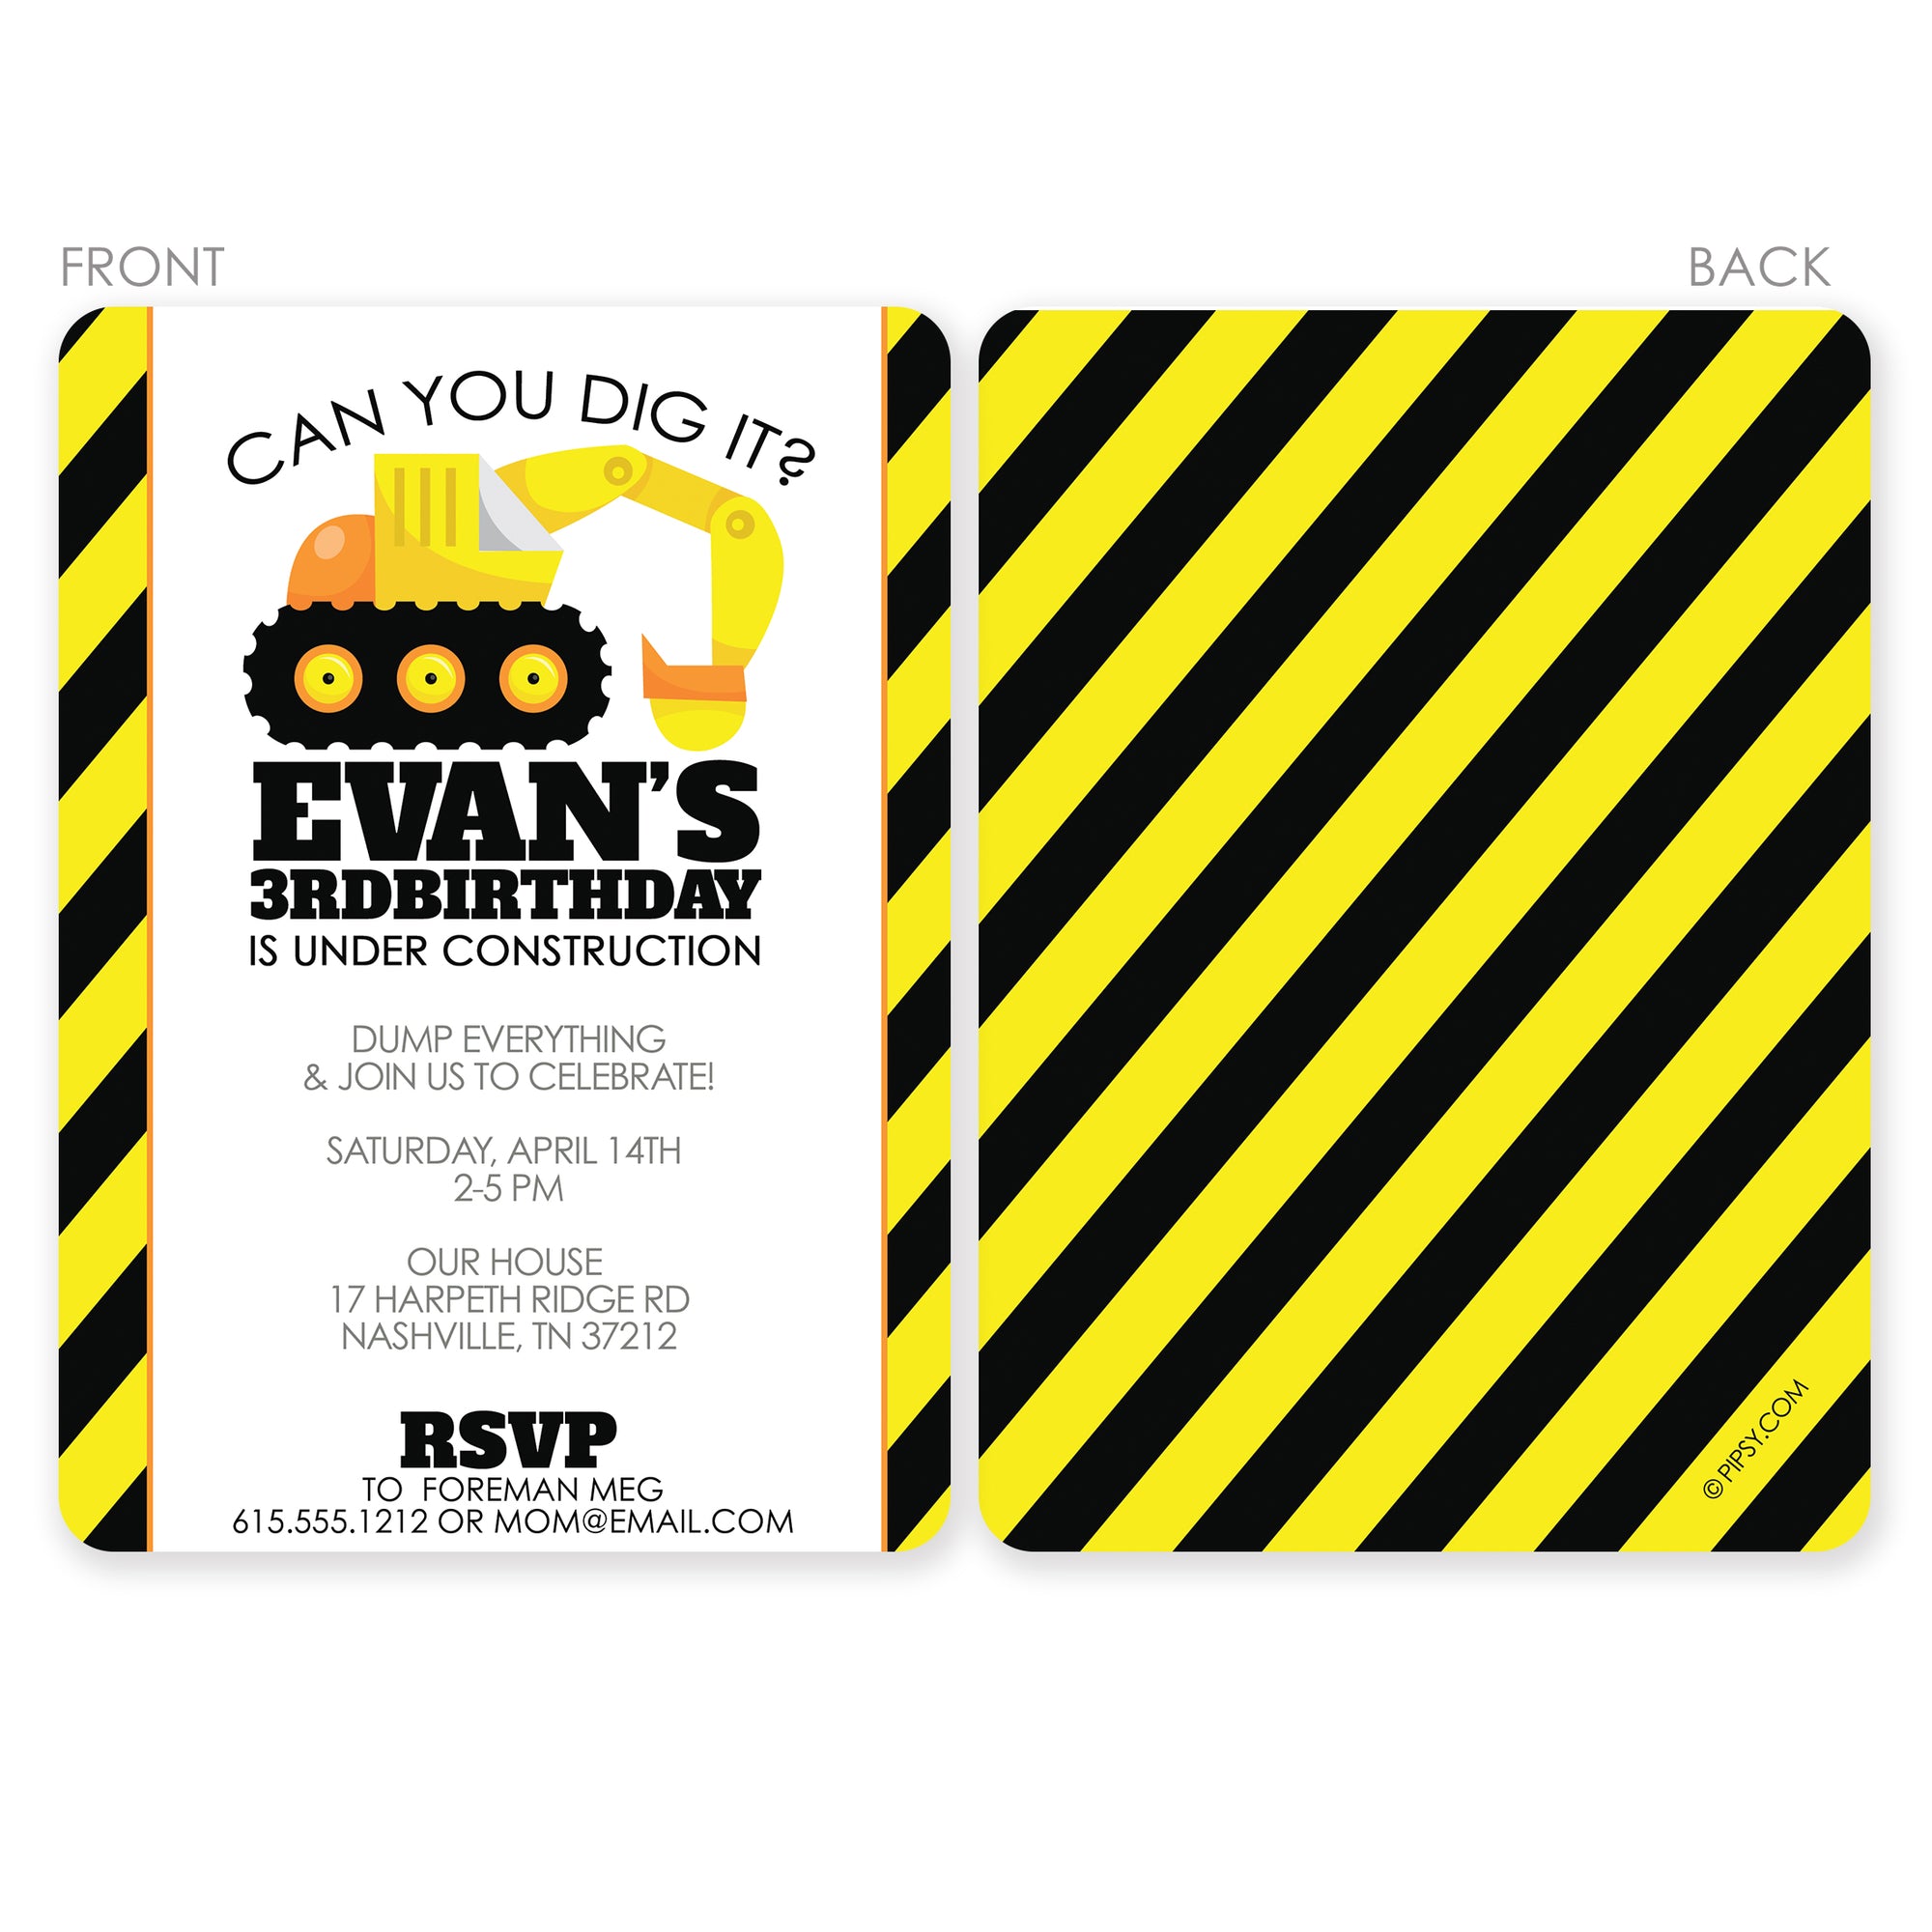 Backhoe Digger Party Birthday Invitation | PIPSY.COM | Black & Yellow, printed on thick cardstock with 2 sided printing, we can add a photo to the back, front back view